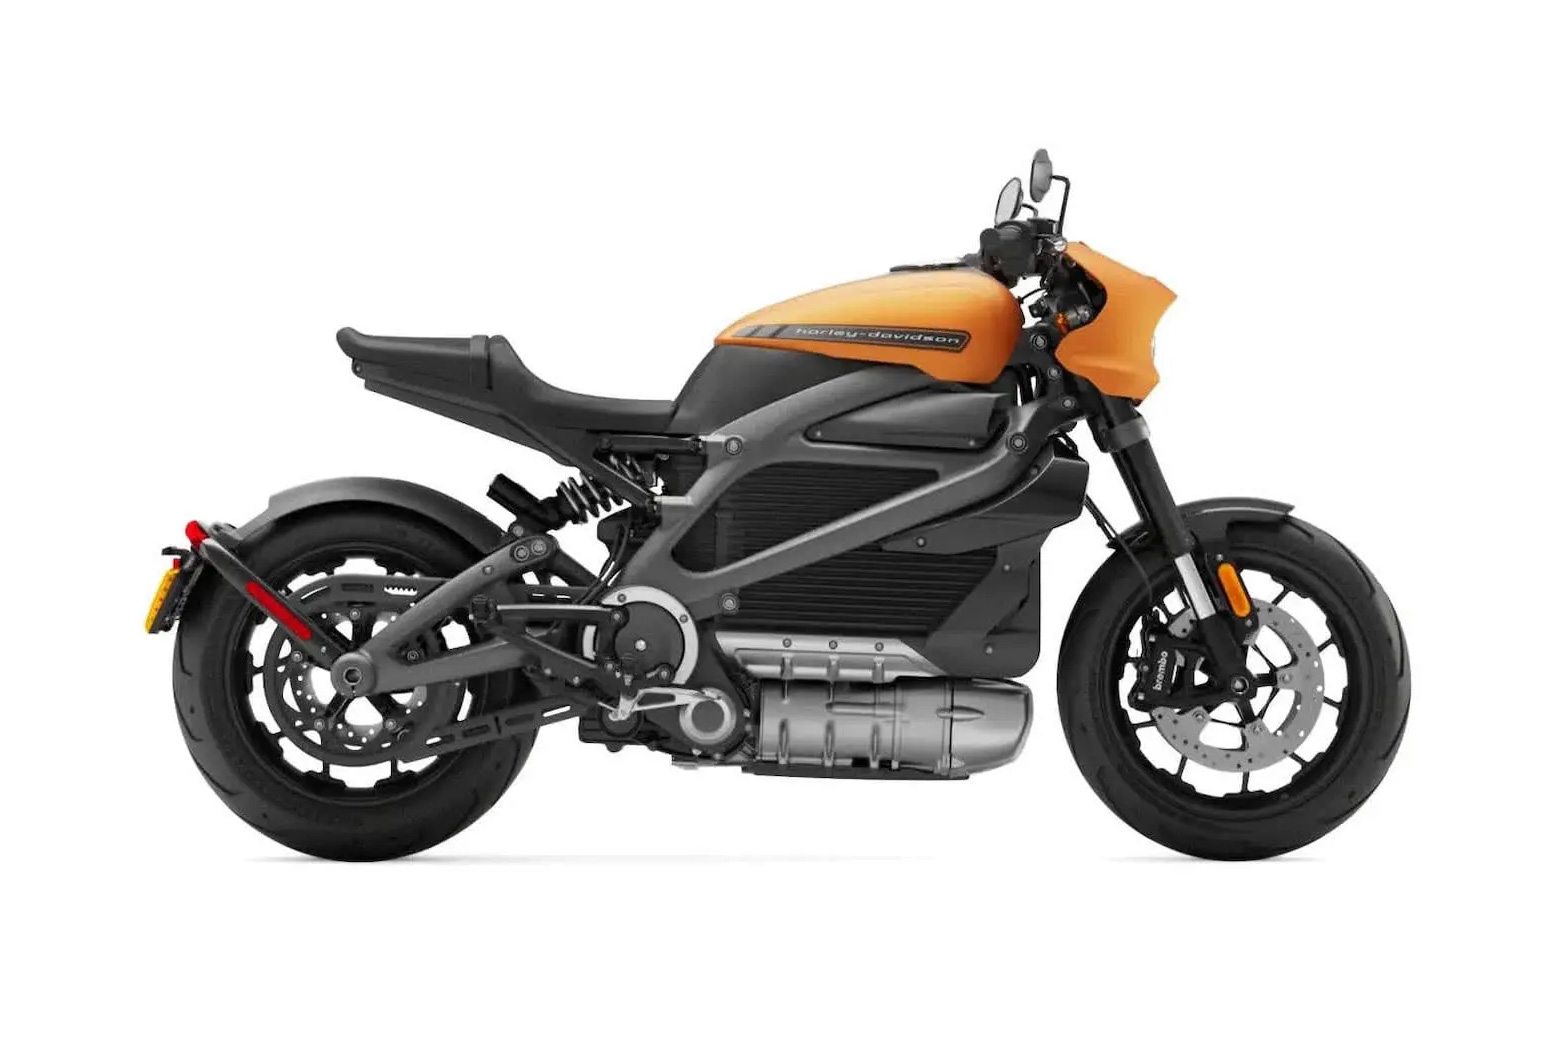 A Harley Davidson Livewire electric motorcycle